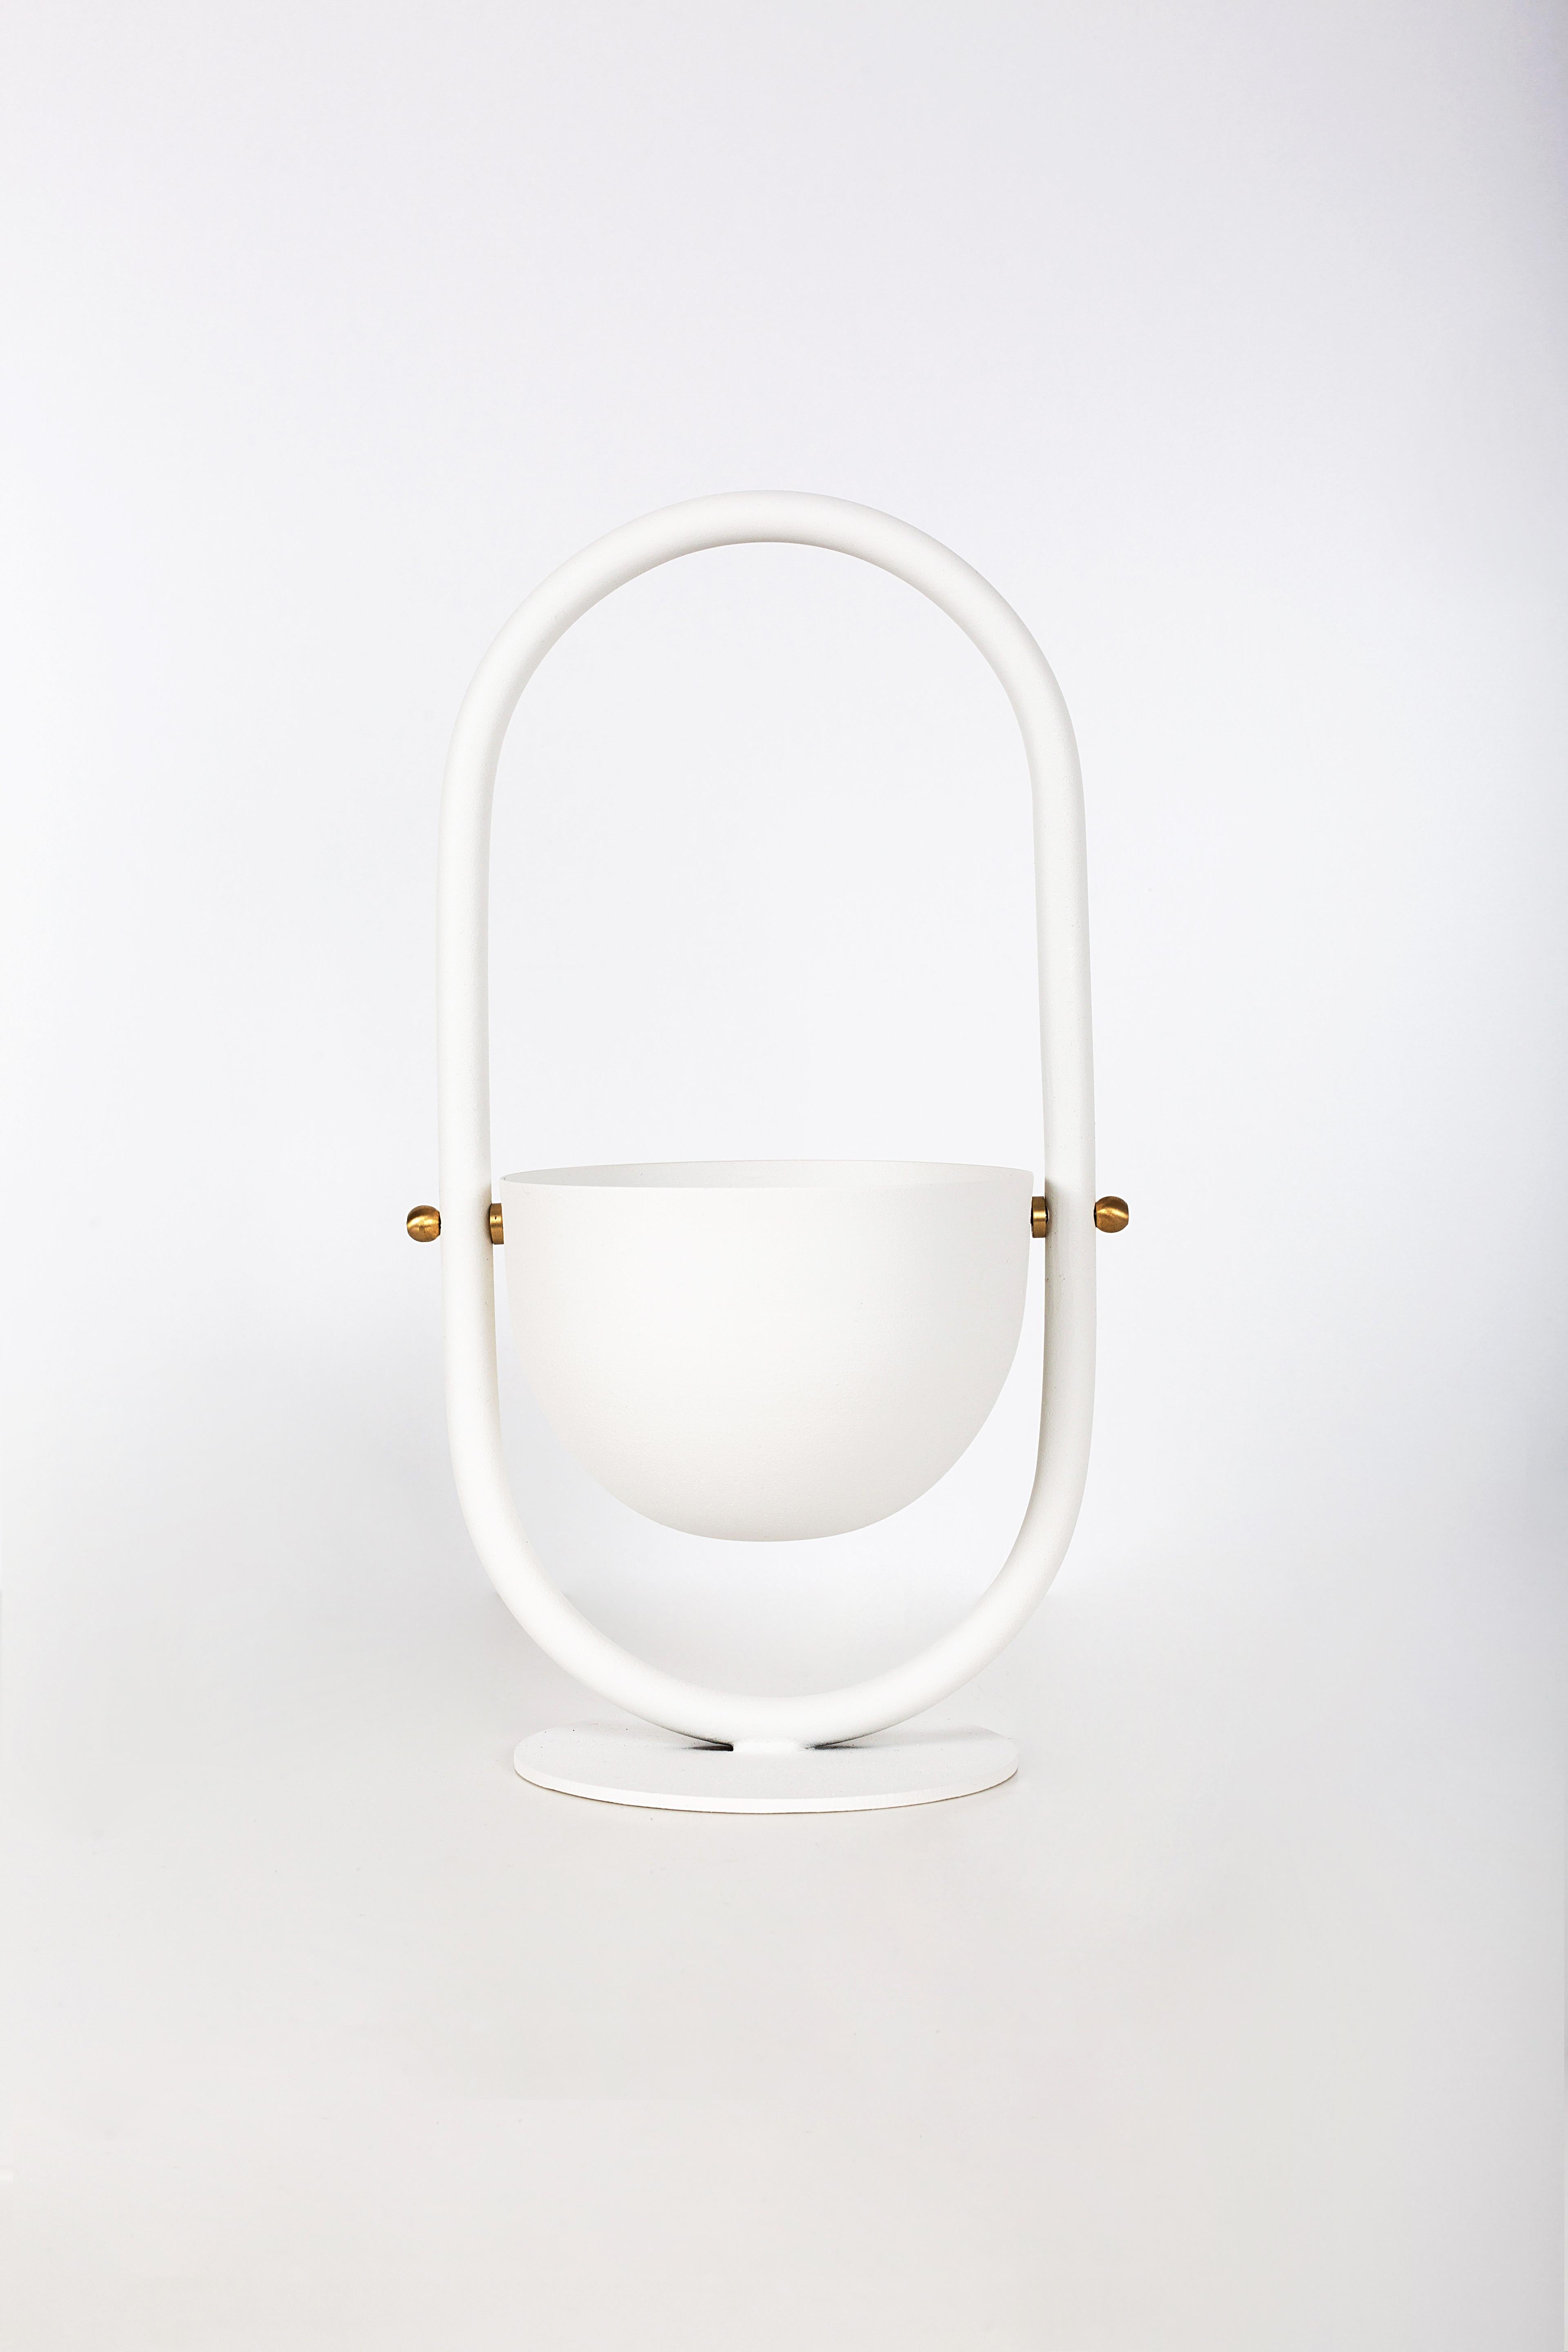 White Sienna bowl/vase by Studio Laf
Dimensions: W 15.5 x H 30 cm
Materials: Metal, brass
Also available: Two different metal colors: White, and black

The harmony between the elegance of the brass material and the naive line metal. Sienna was